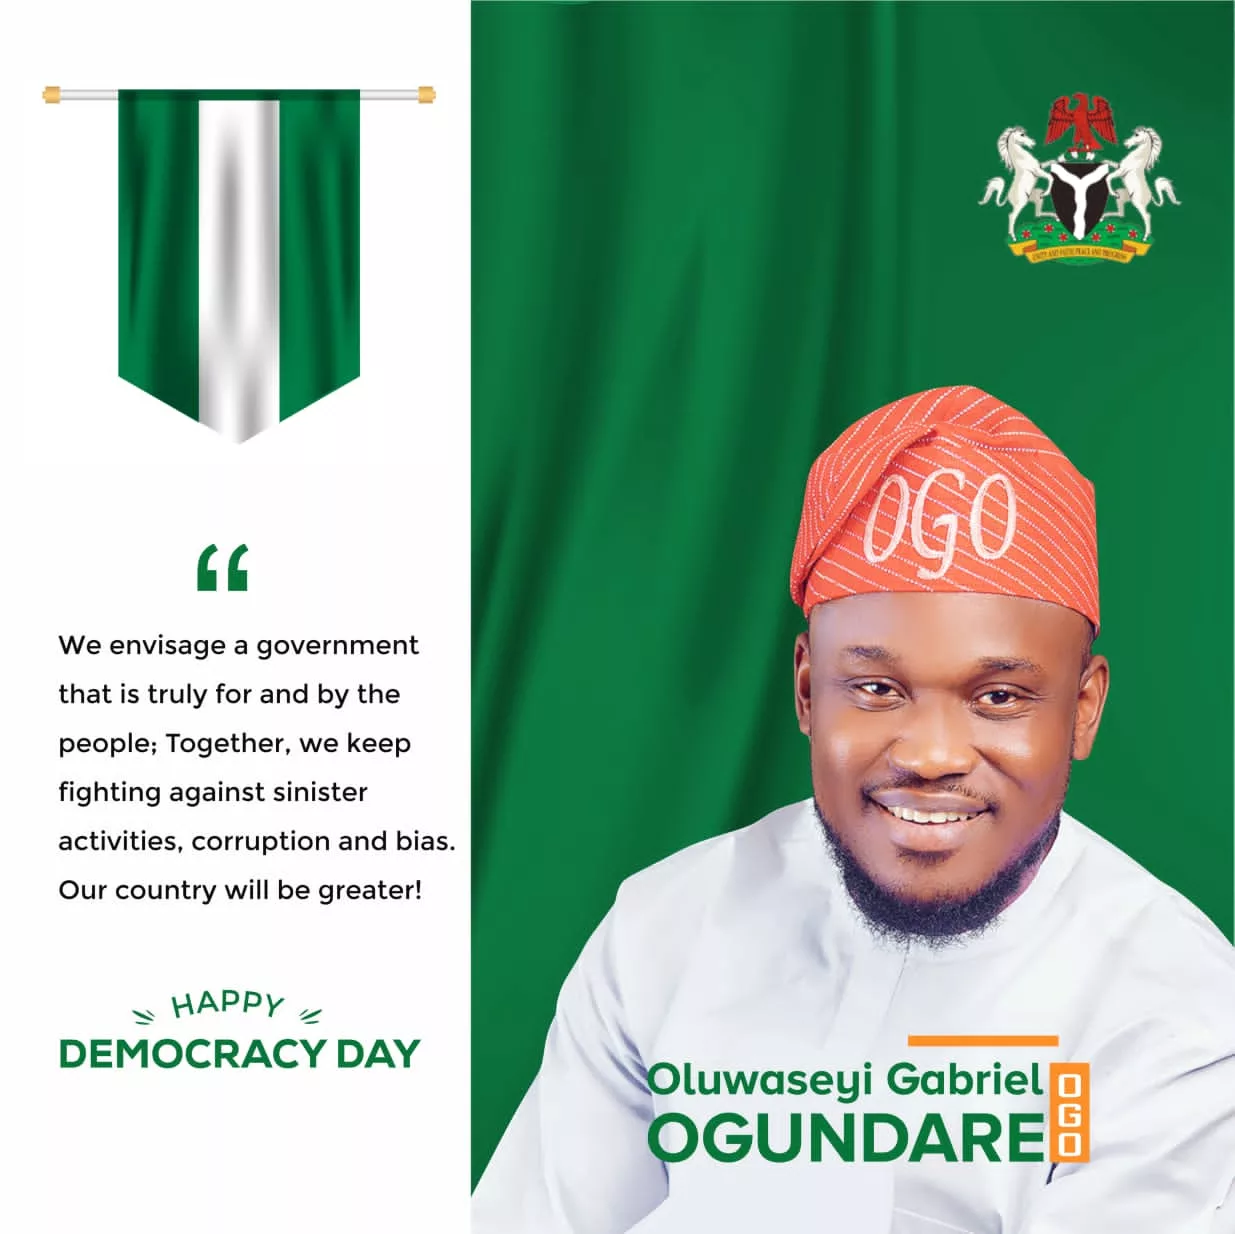 DEMOCRACY DAY: WE MUST UPHOLD THE VALUES OF LIBERTY AND GOOD GOVERNANCE-OGUNDARE